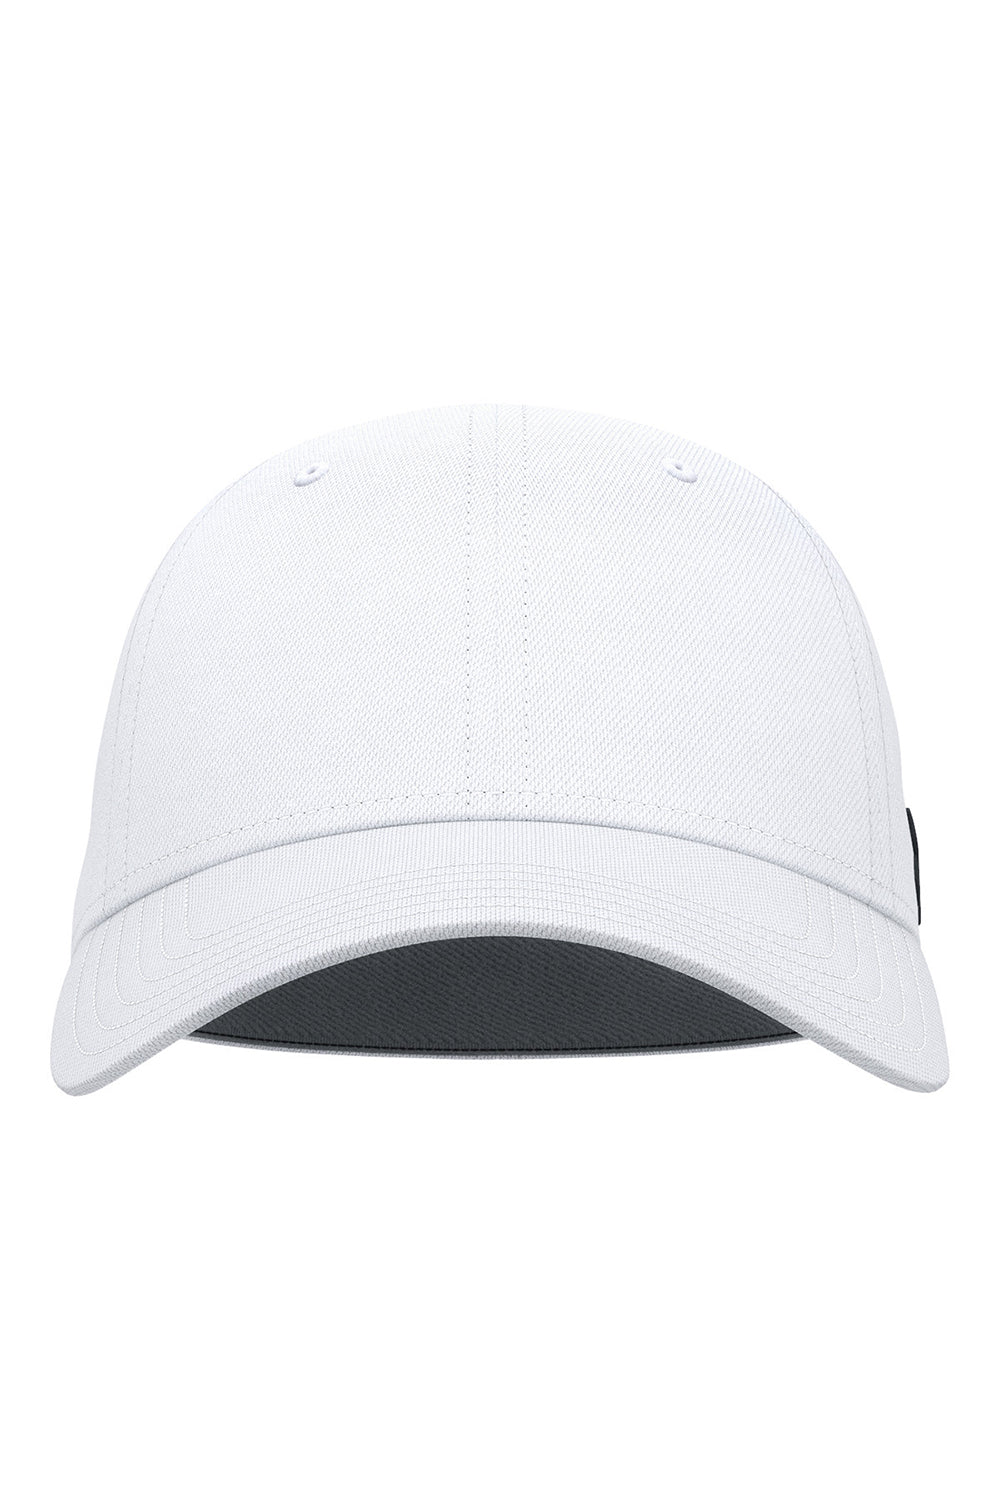 Under Armour 1376702 Mens Team Moisture Wicking Blitzing Hat White Flat Front